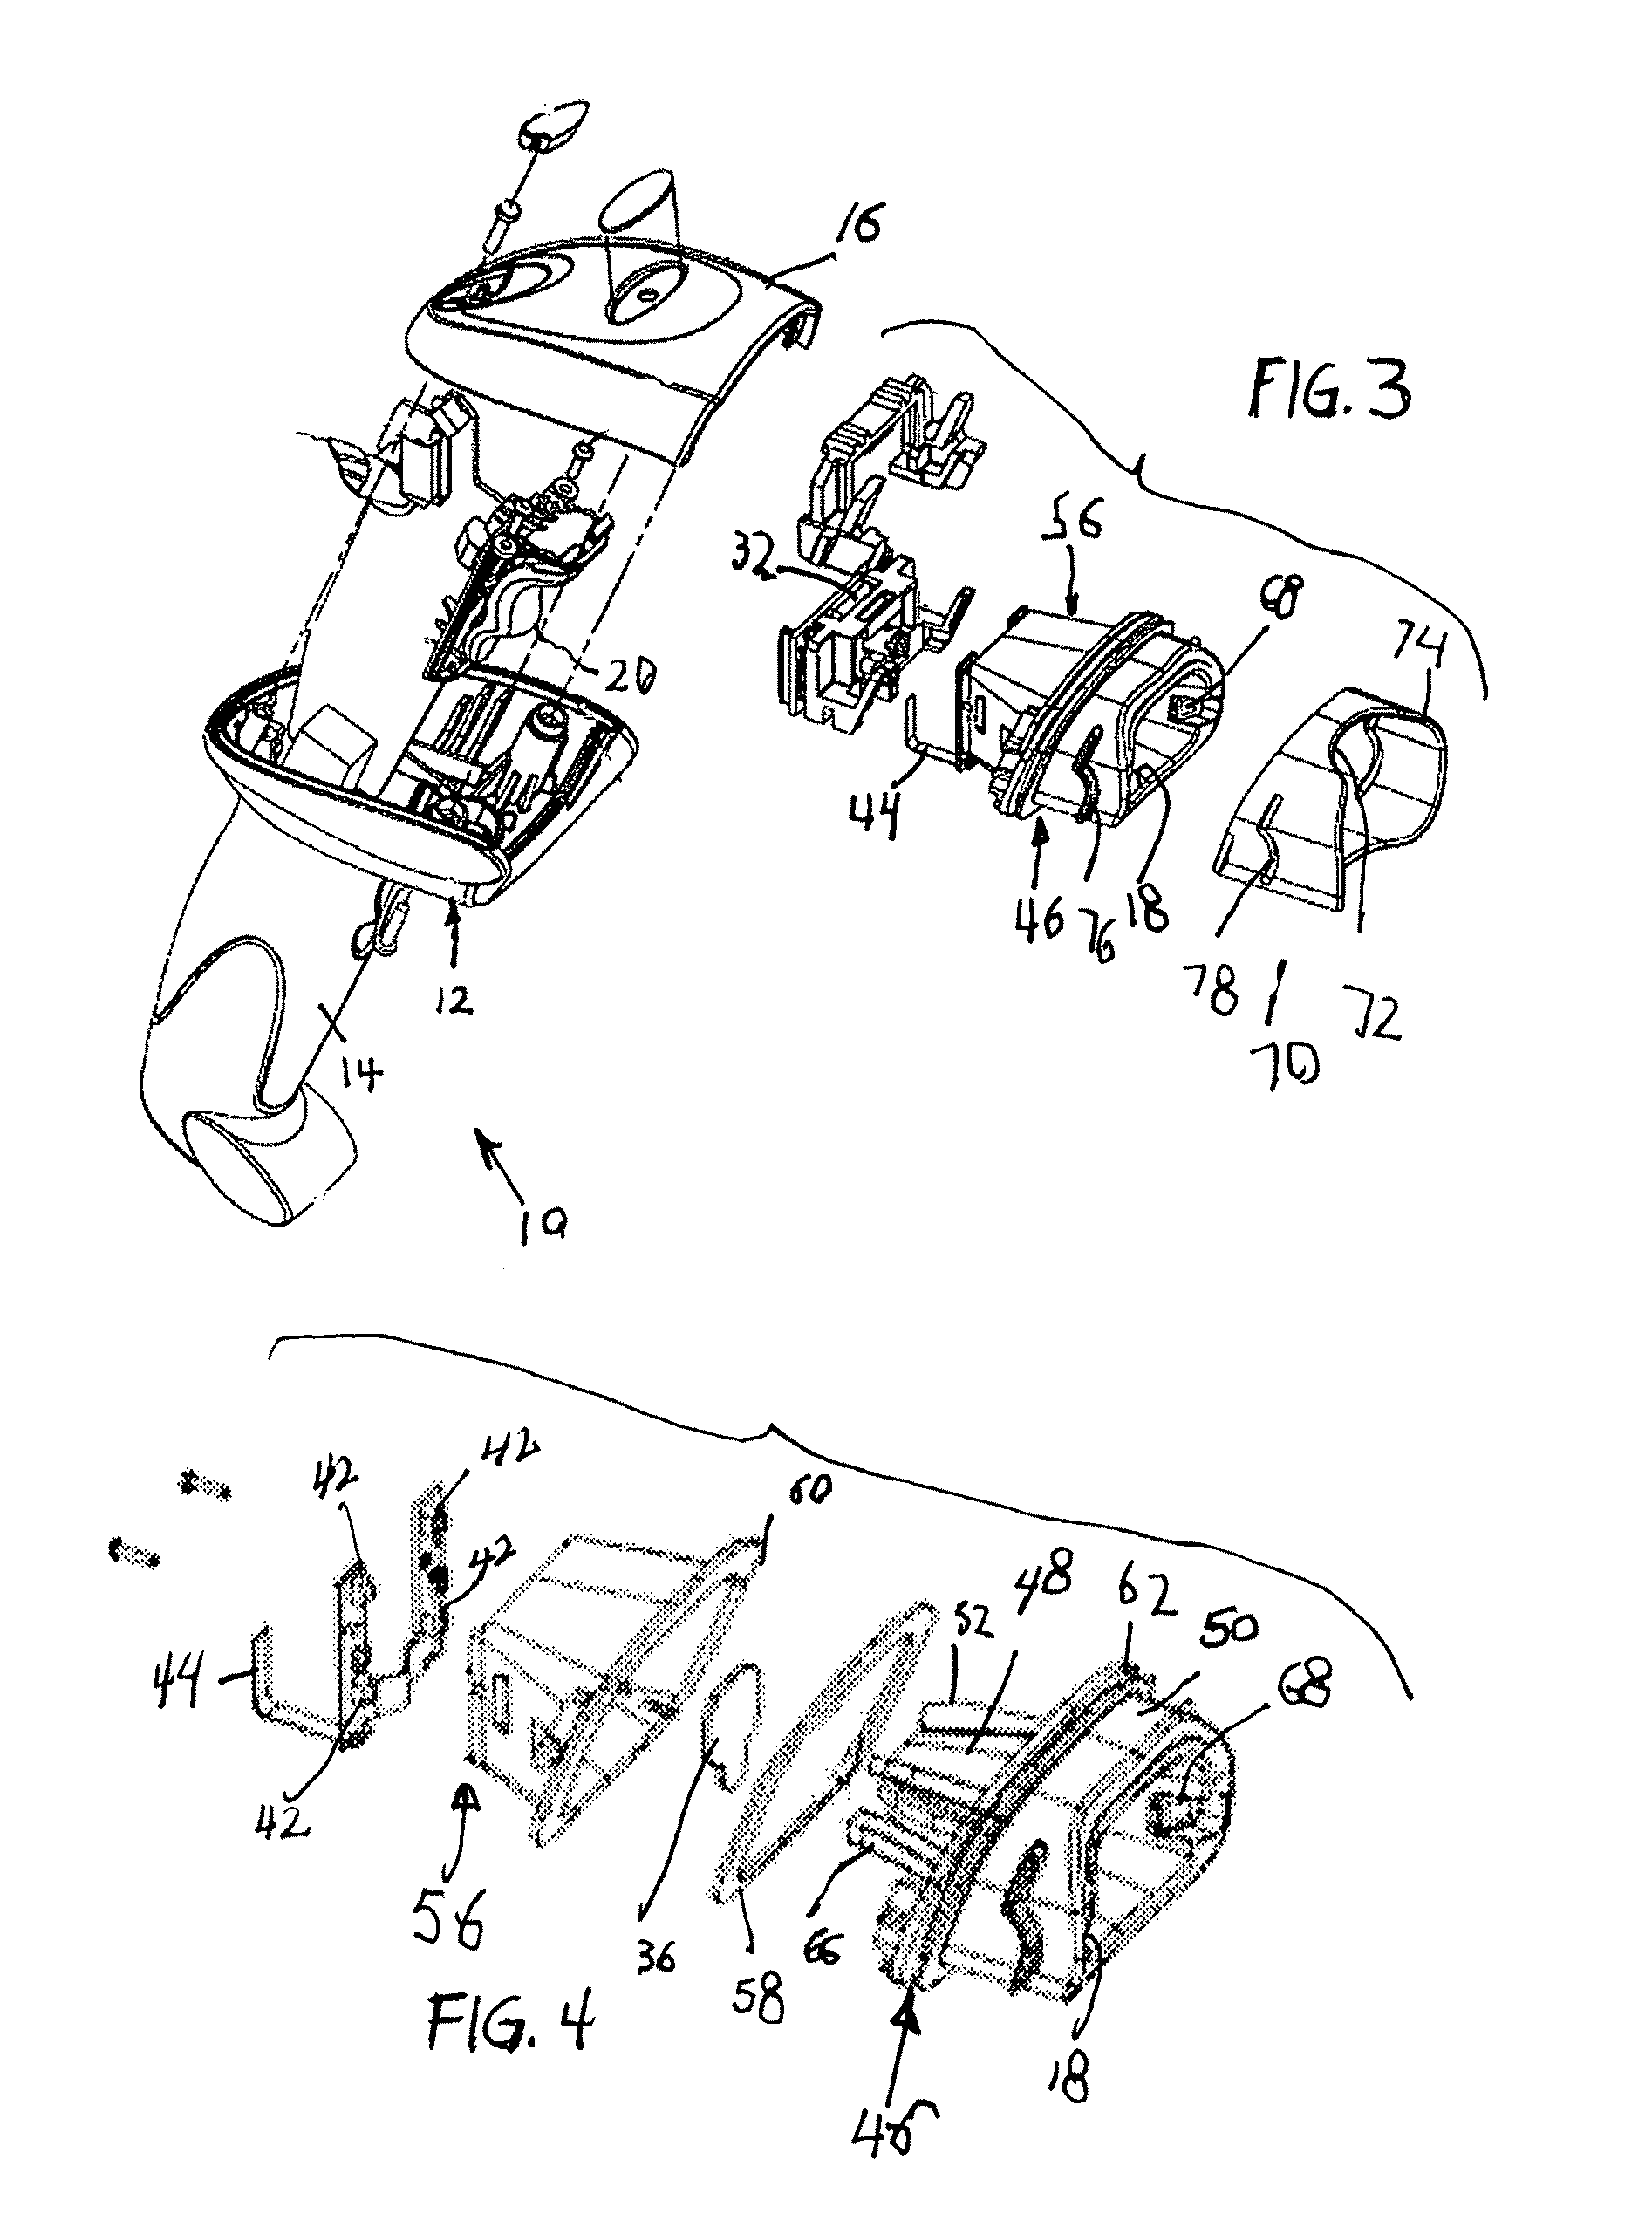 Arrangement for and method of uniformly illuminating direct part markings to be imaged and electro-optically read